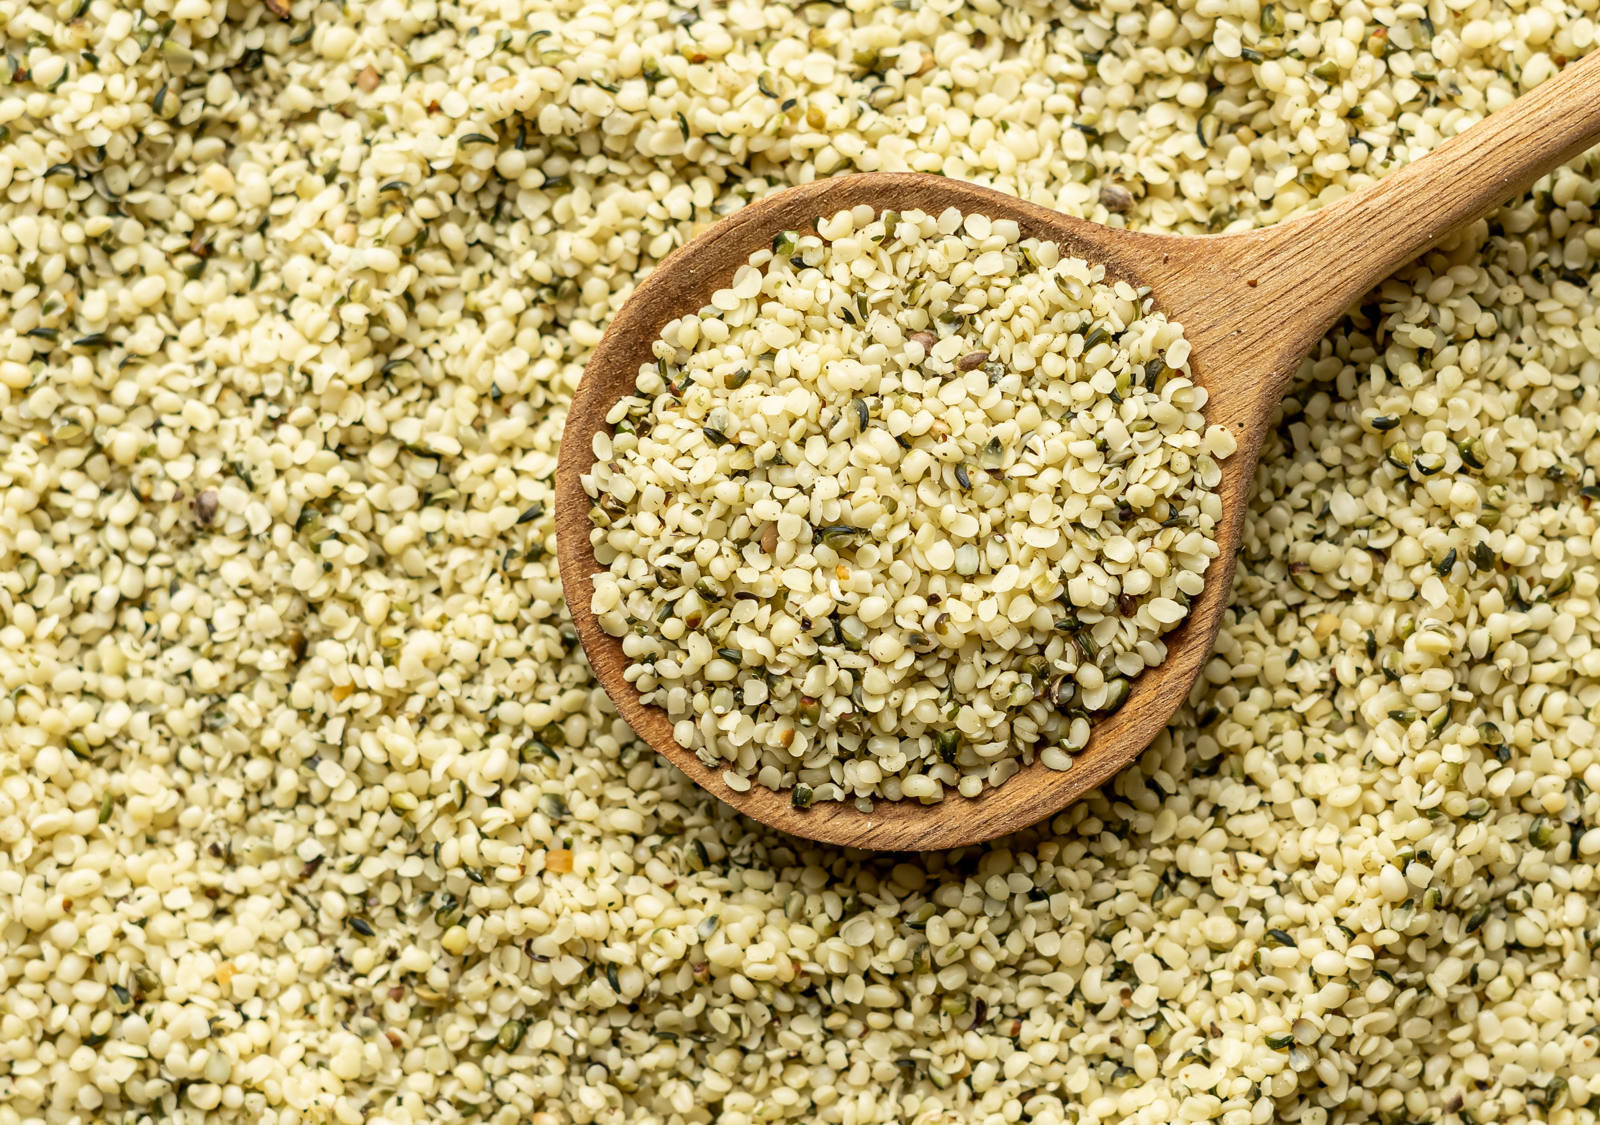 Hemp is a superfood – healthy and nutritious